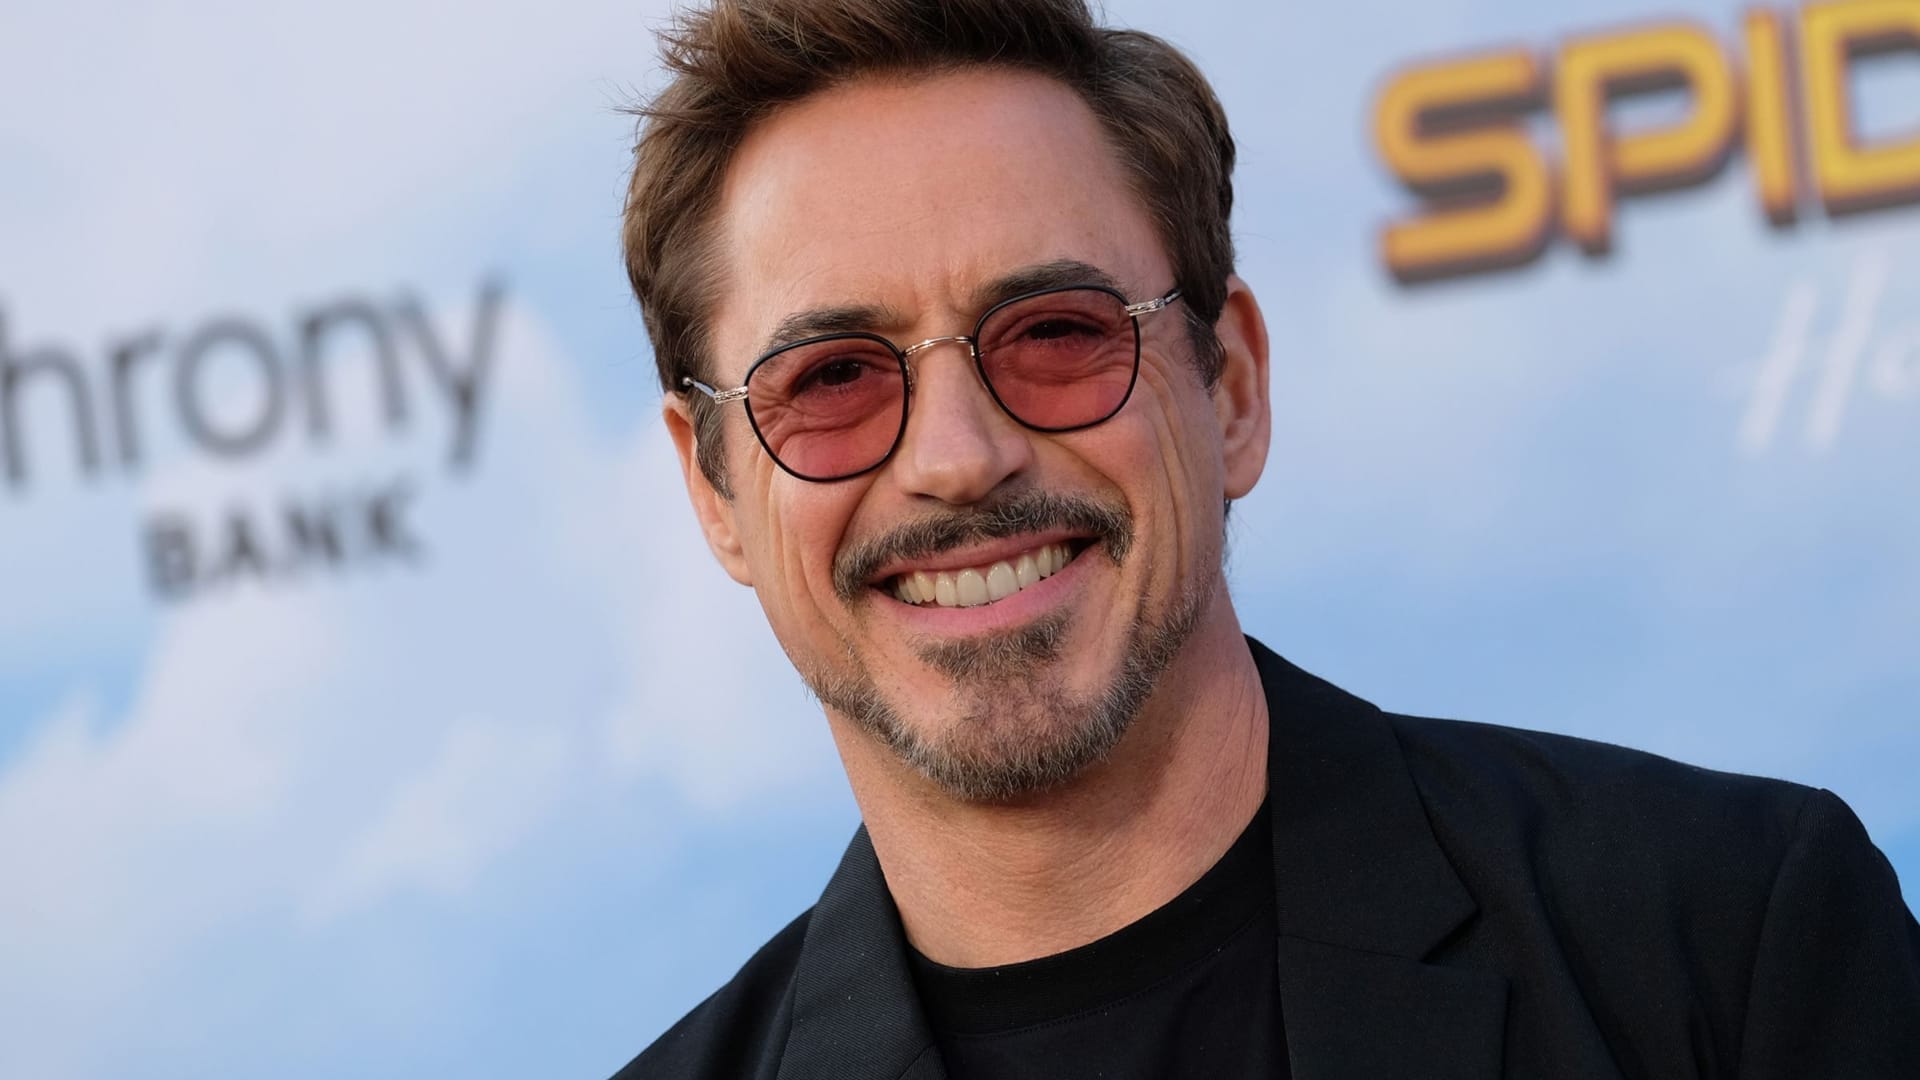 Robert Downy Jr.’s Unexpected Turn For The Worst